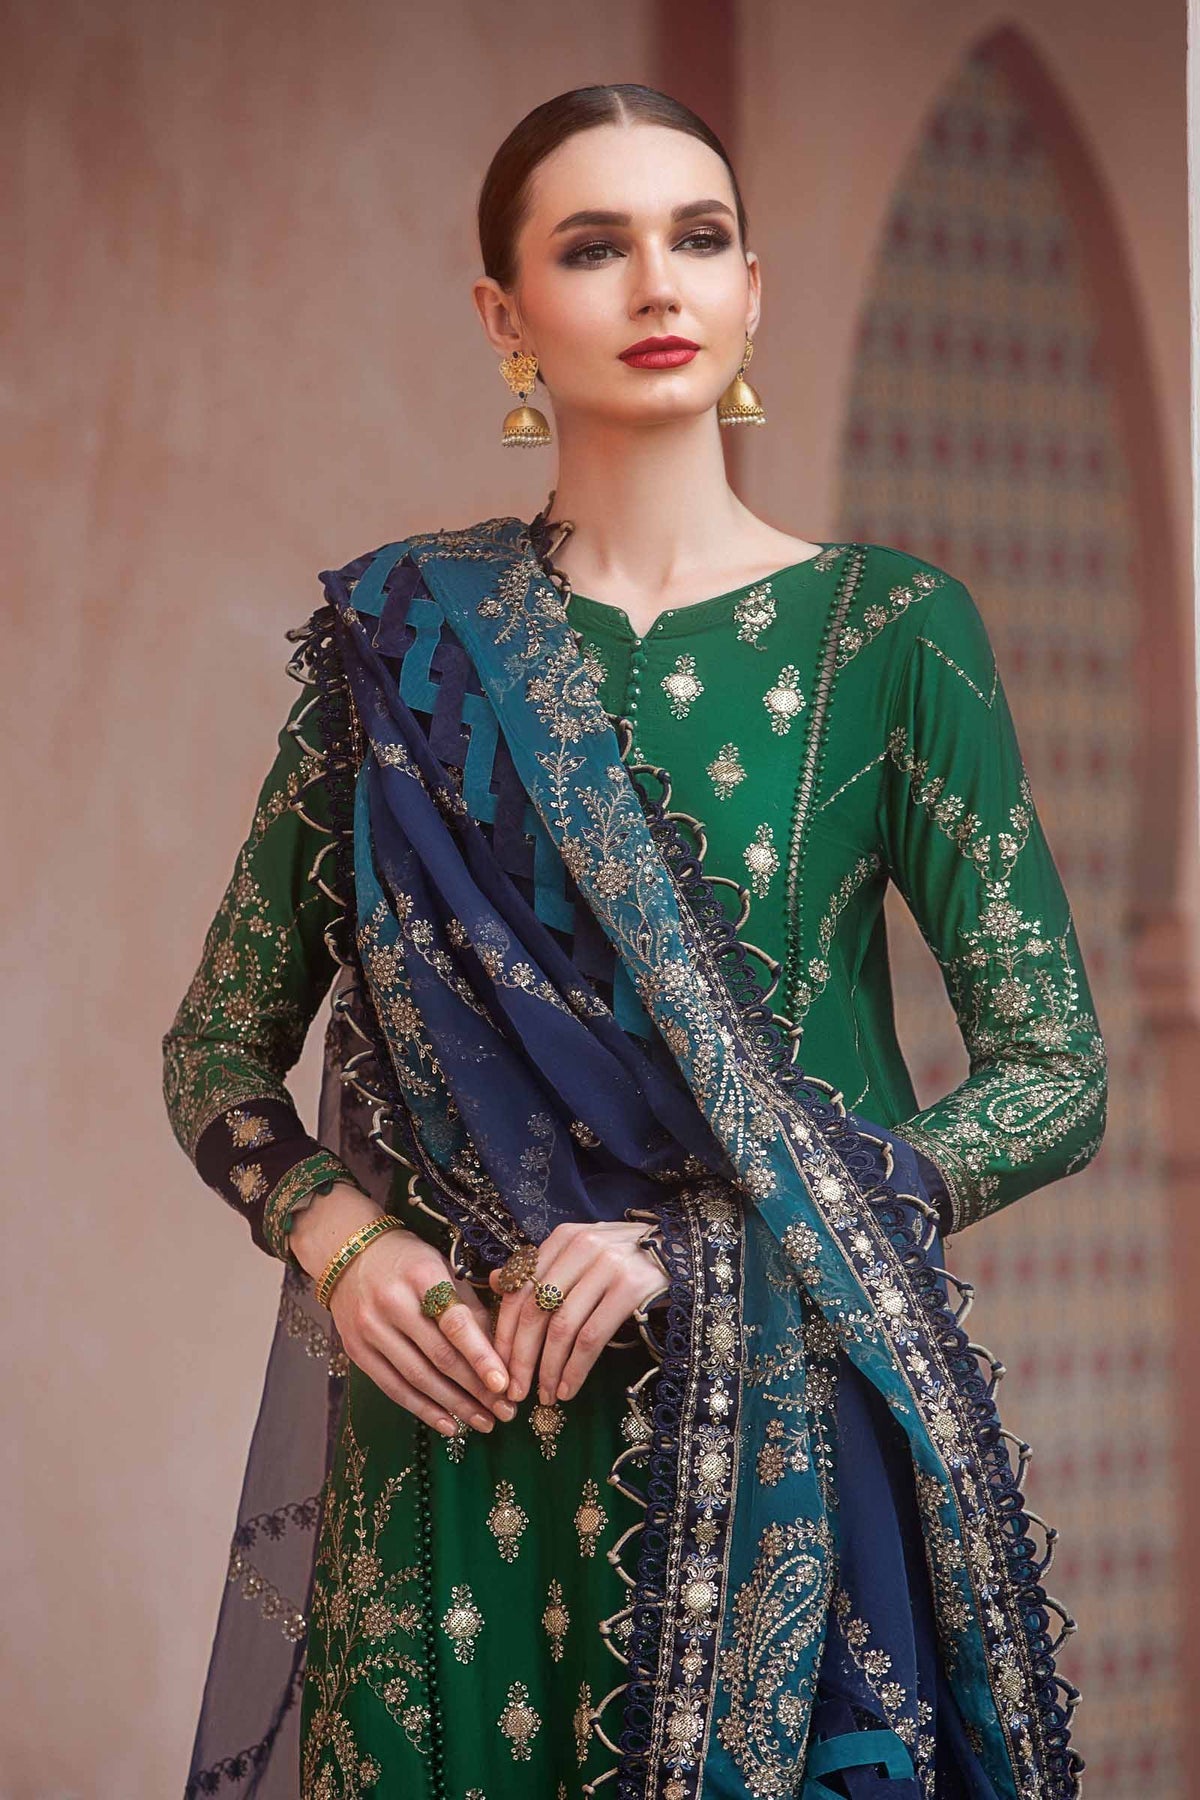 Buy Now, D#6 - Emerald Green- Maria. B Sateen 2023 - Wedding and Bridal Party Dresses -  Pakistani Festive wear - Maria. B in UK - Fall Collection'23